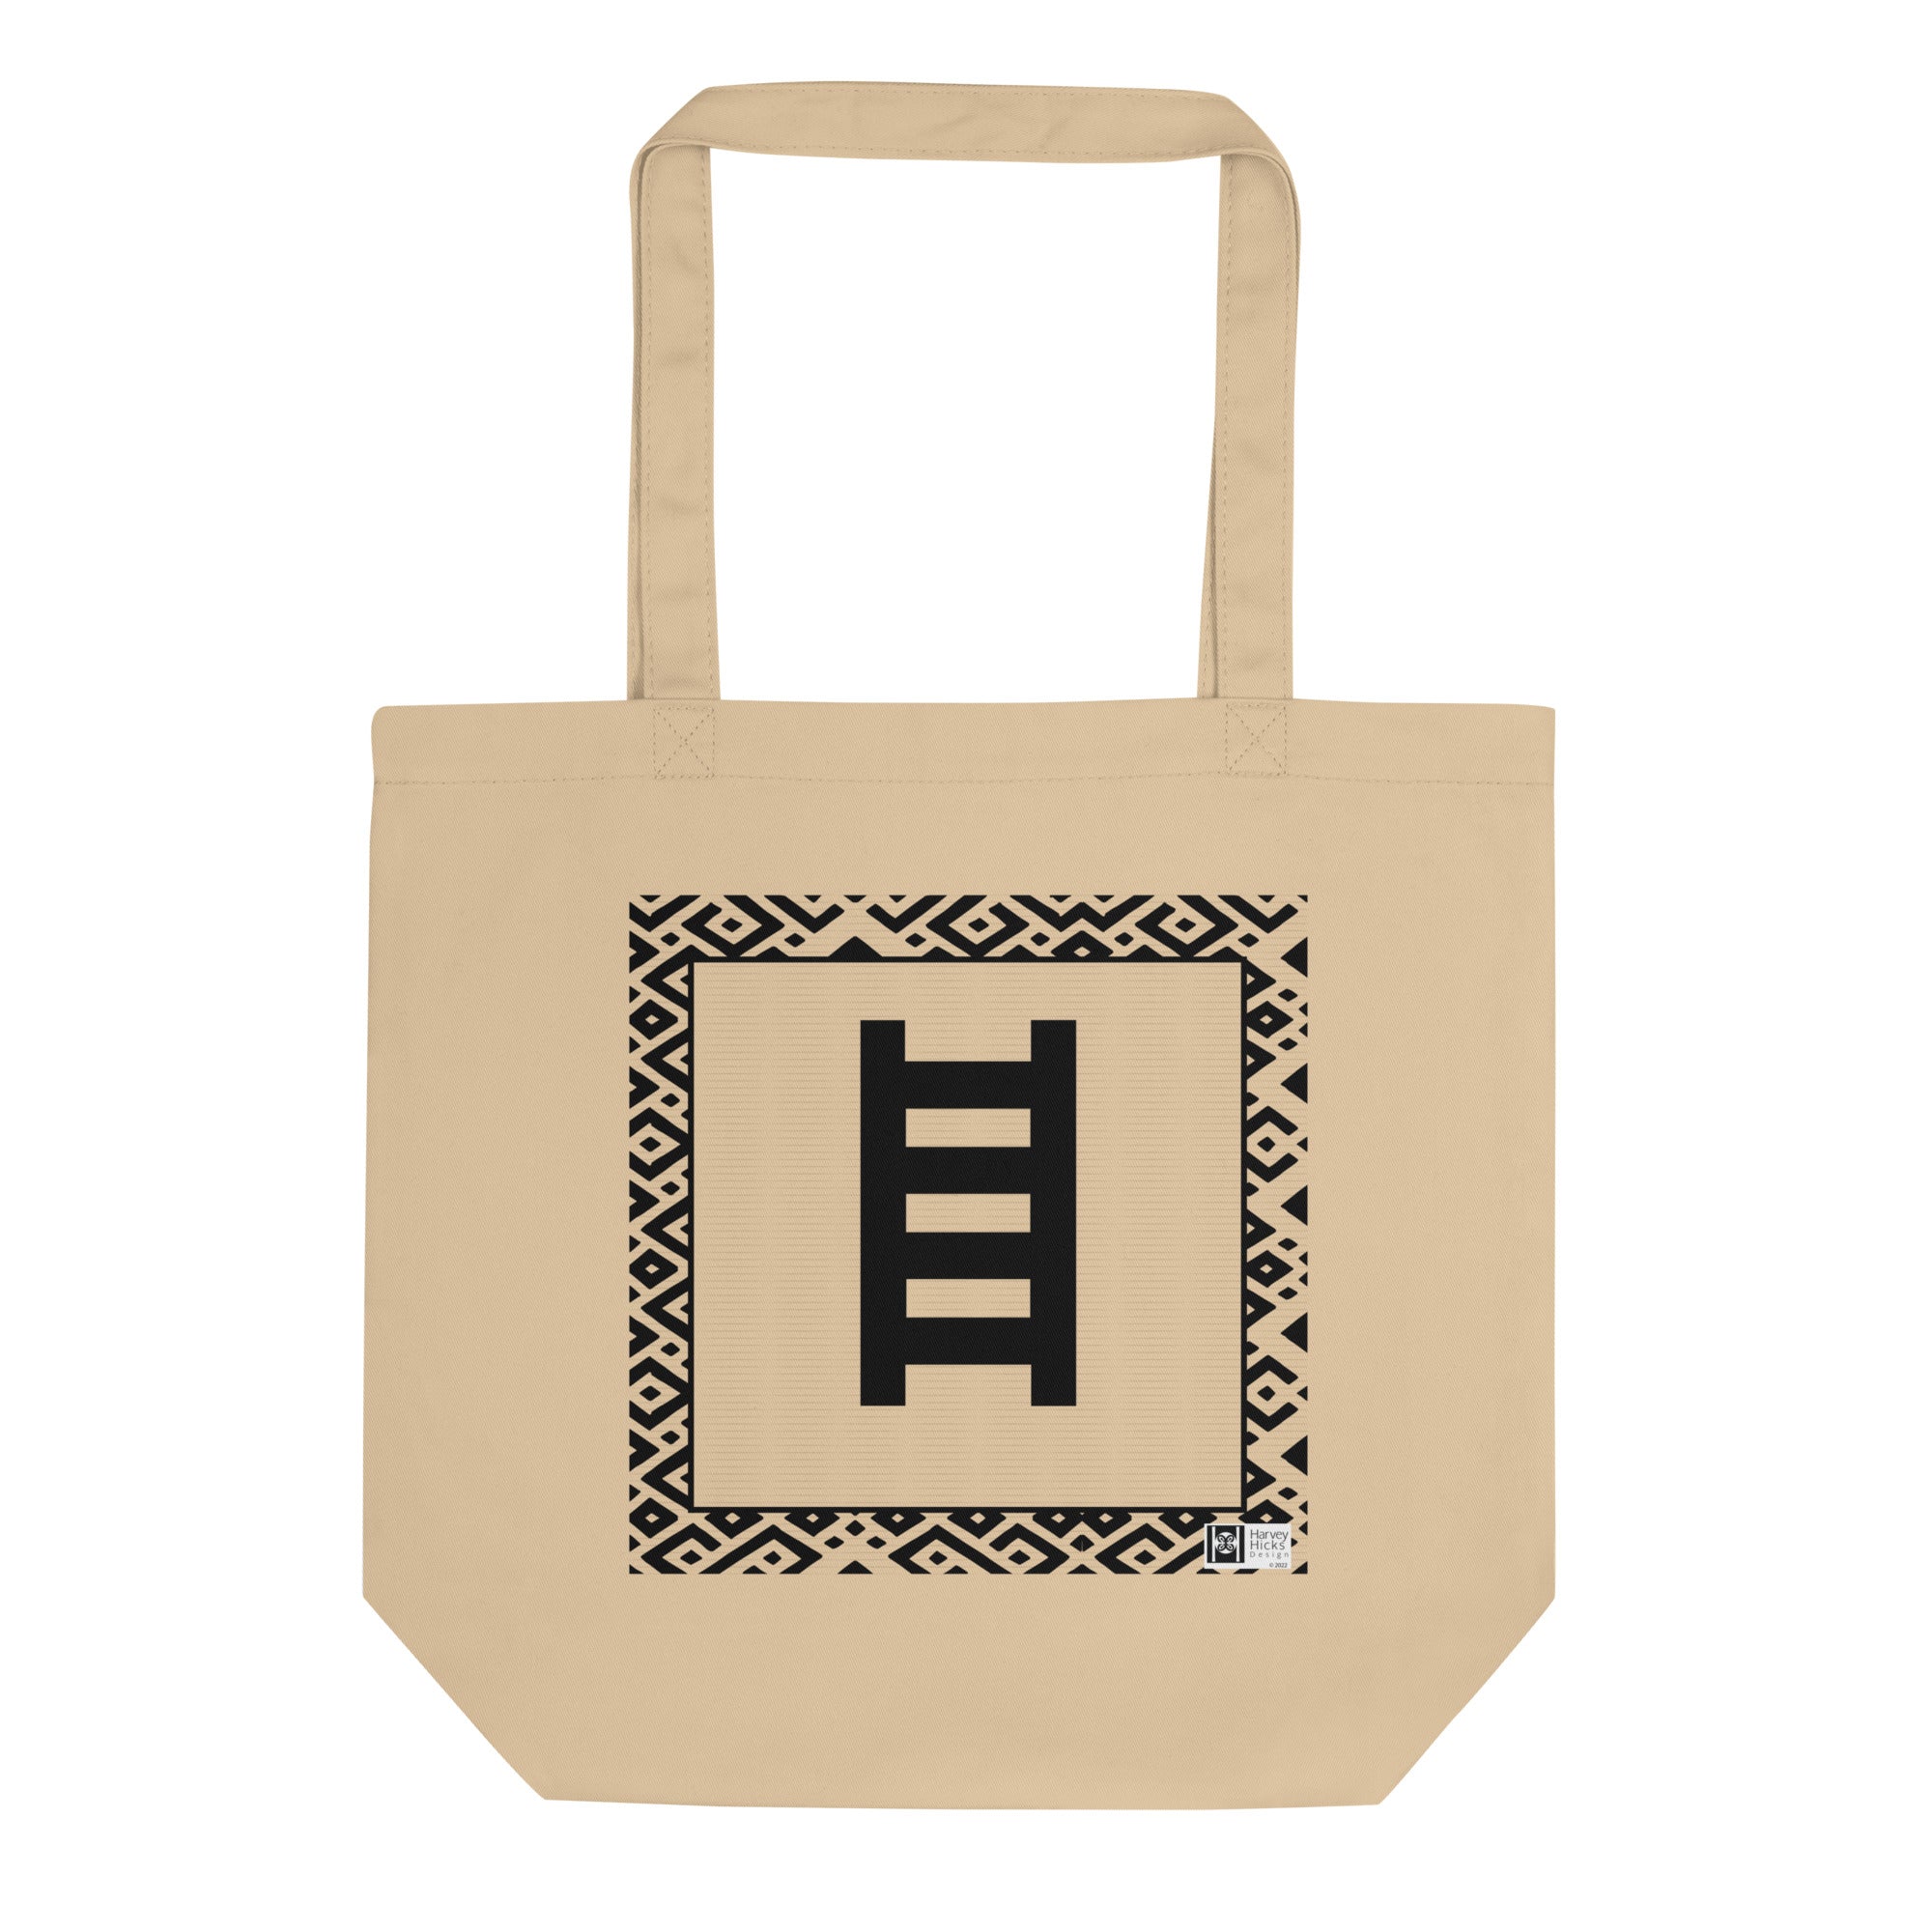 100% cotton Eco Tote Bag, featuring the Adinkra symbol for the inevitable, NO TEXT